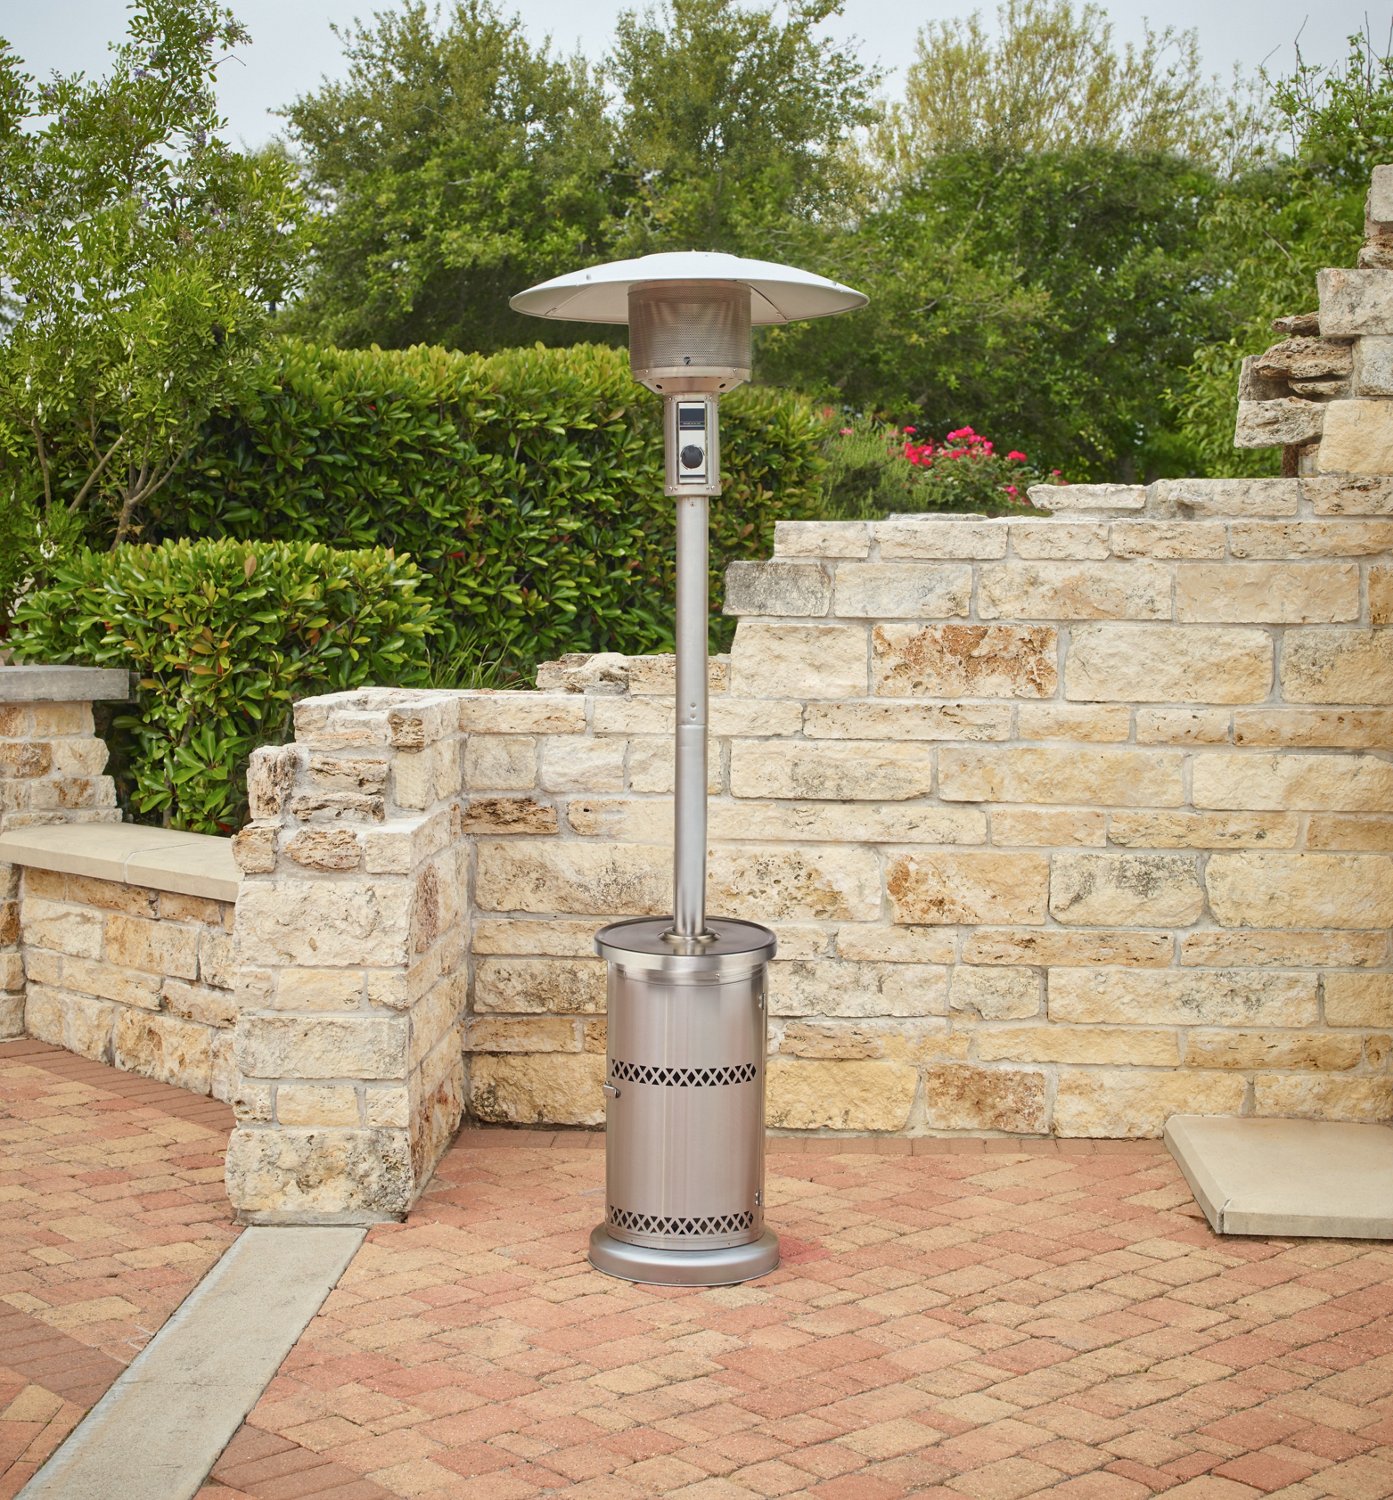 With a Tabletop Patio Heater You'll Never Want to Come Inside